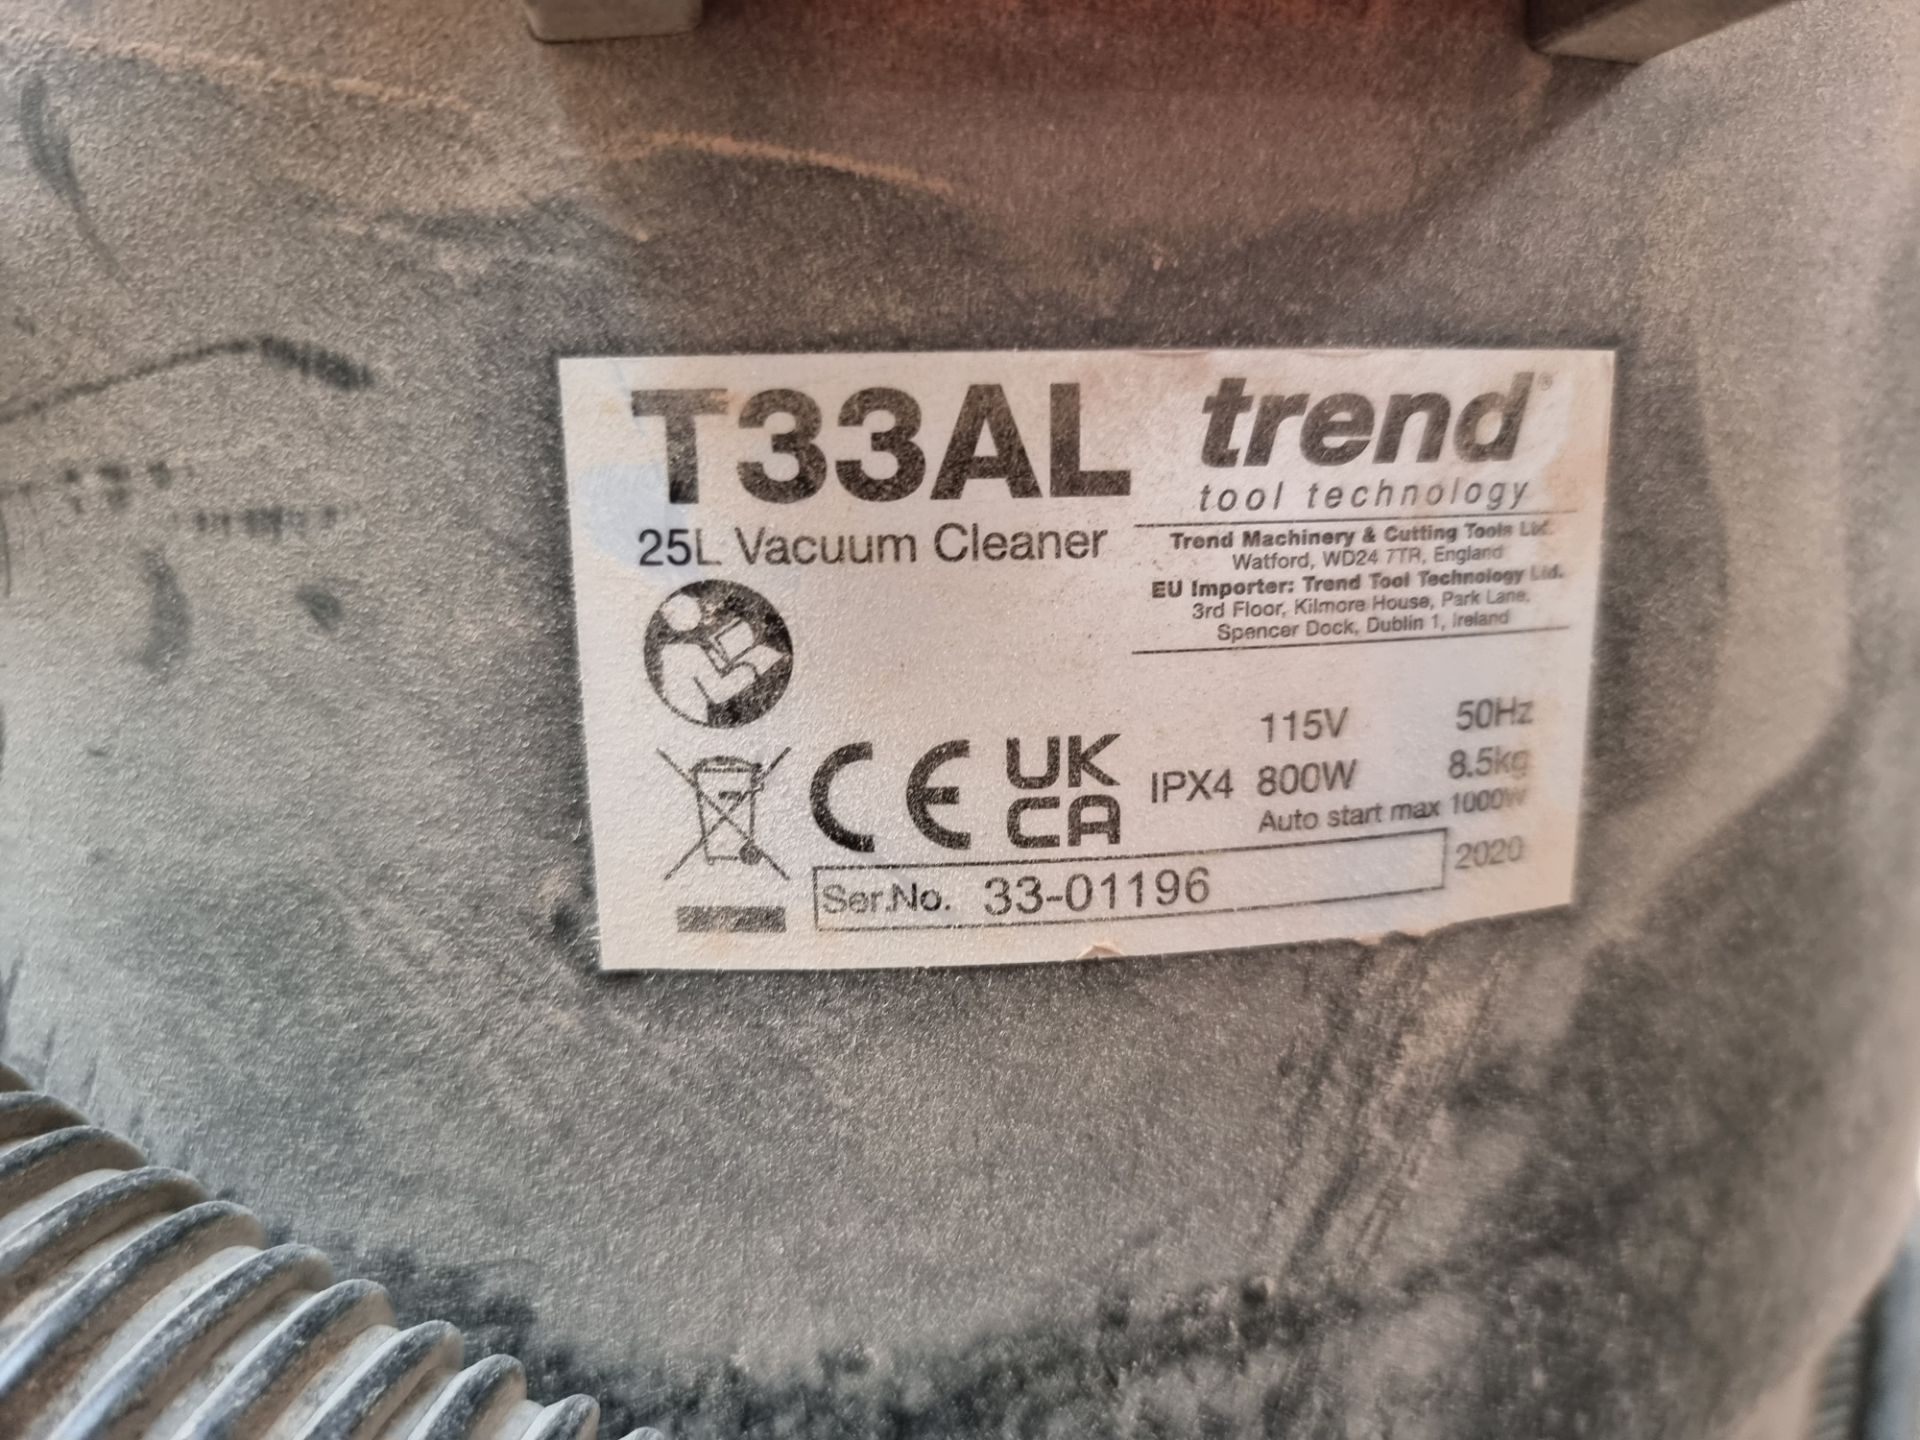 3: Trend Tool Technology T33AL 25L Vacuum Cleaner. Serial Number: 33-01196, 33-01937, 3-00149 Year o - Image 2 of 5